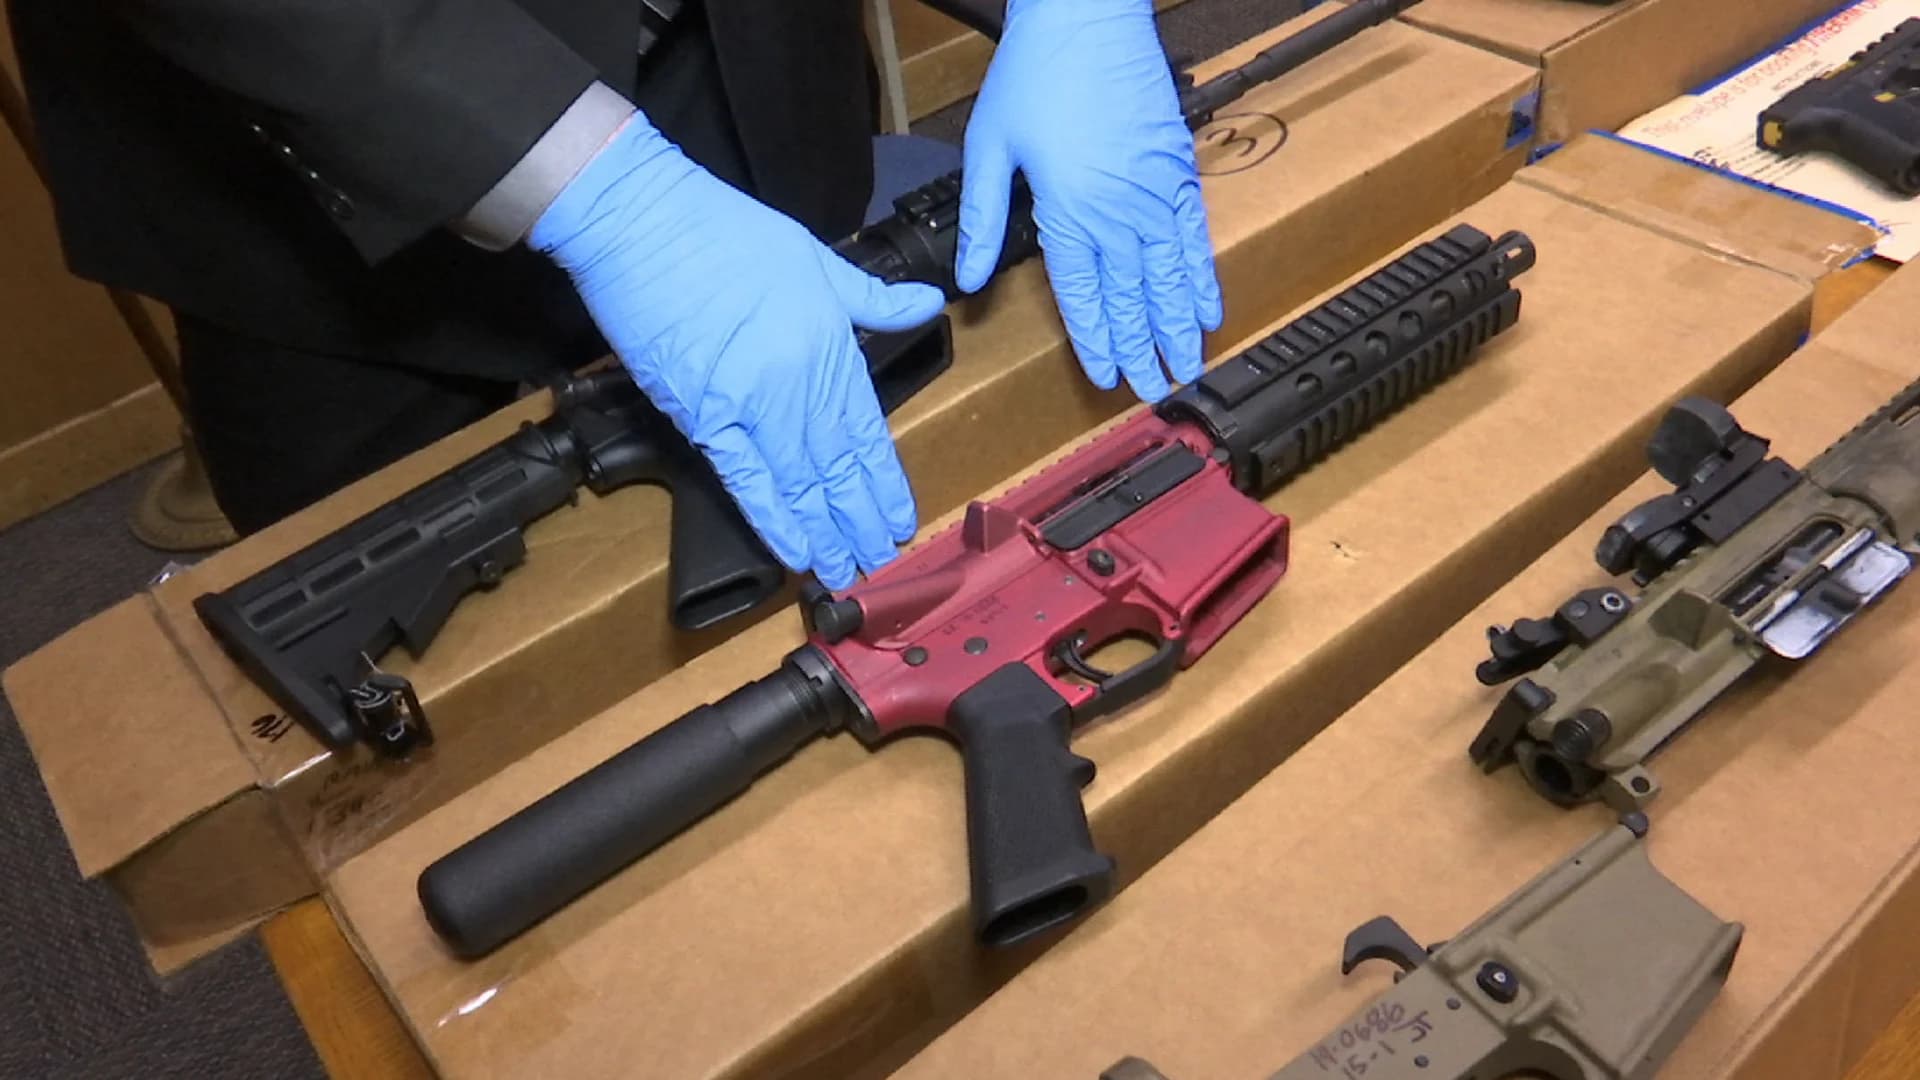 Justice Dept. rule would aim to crack down on 'ghost guns'